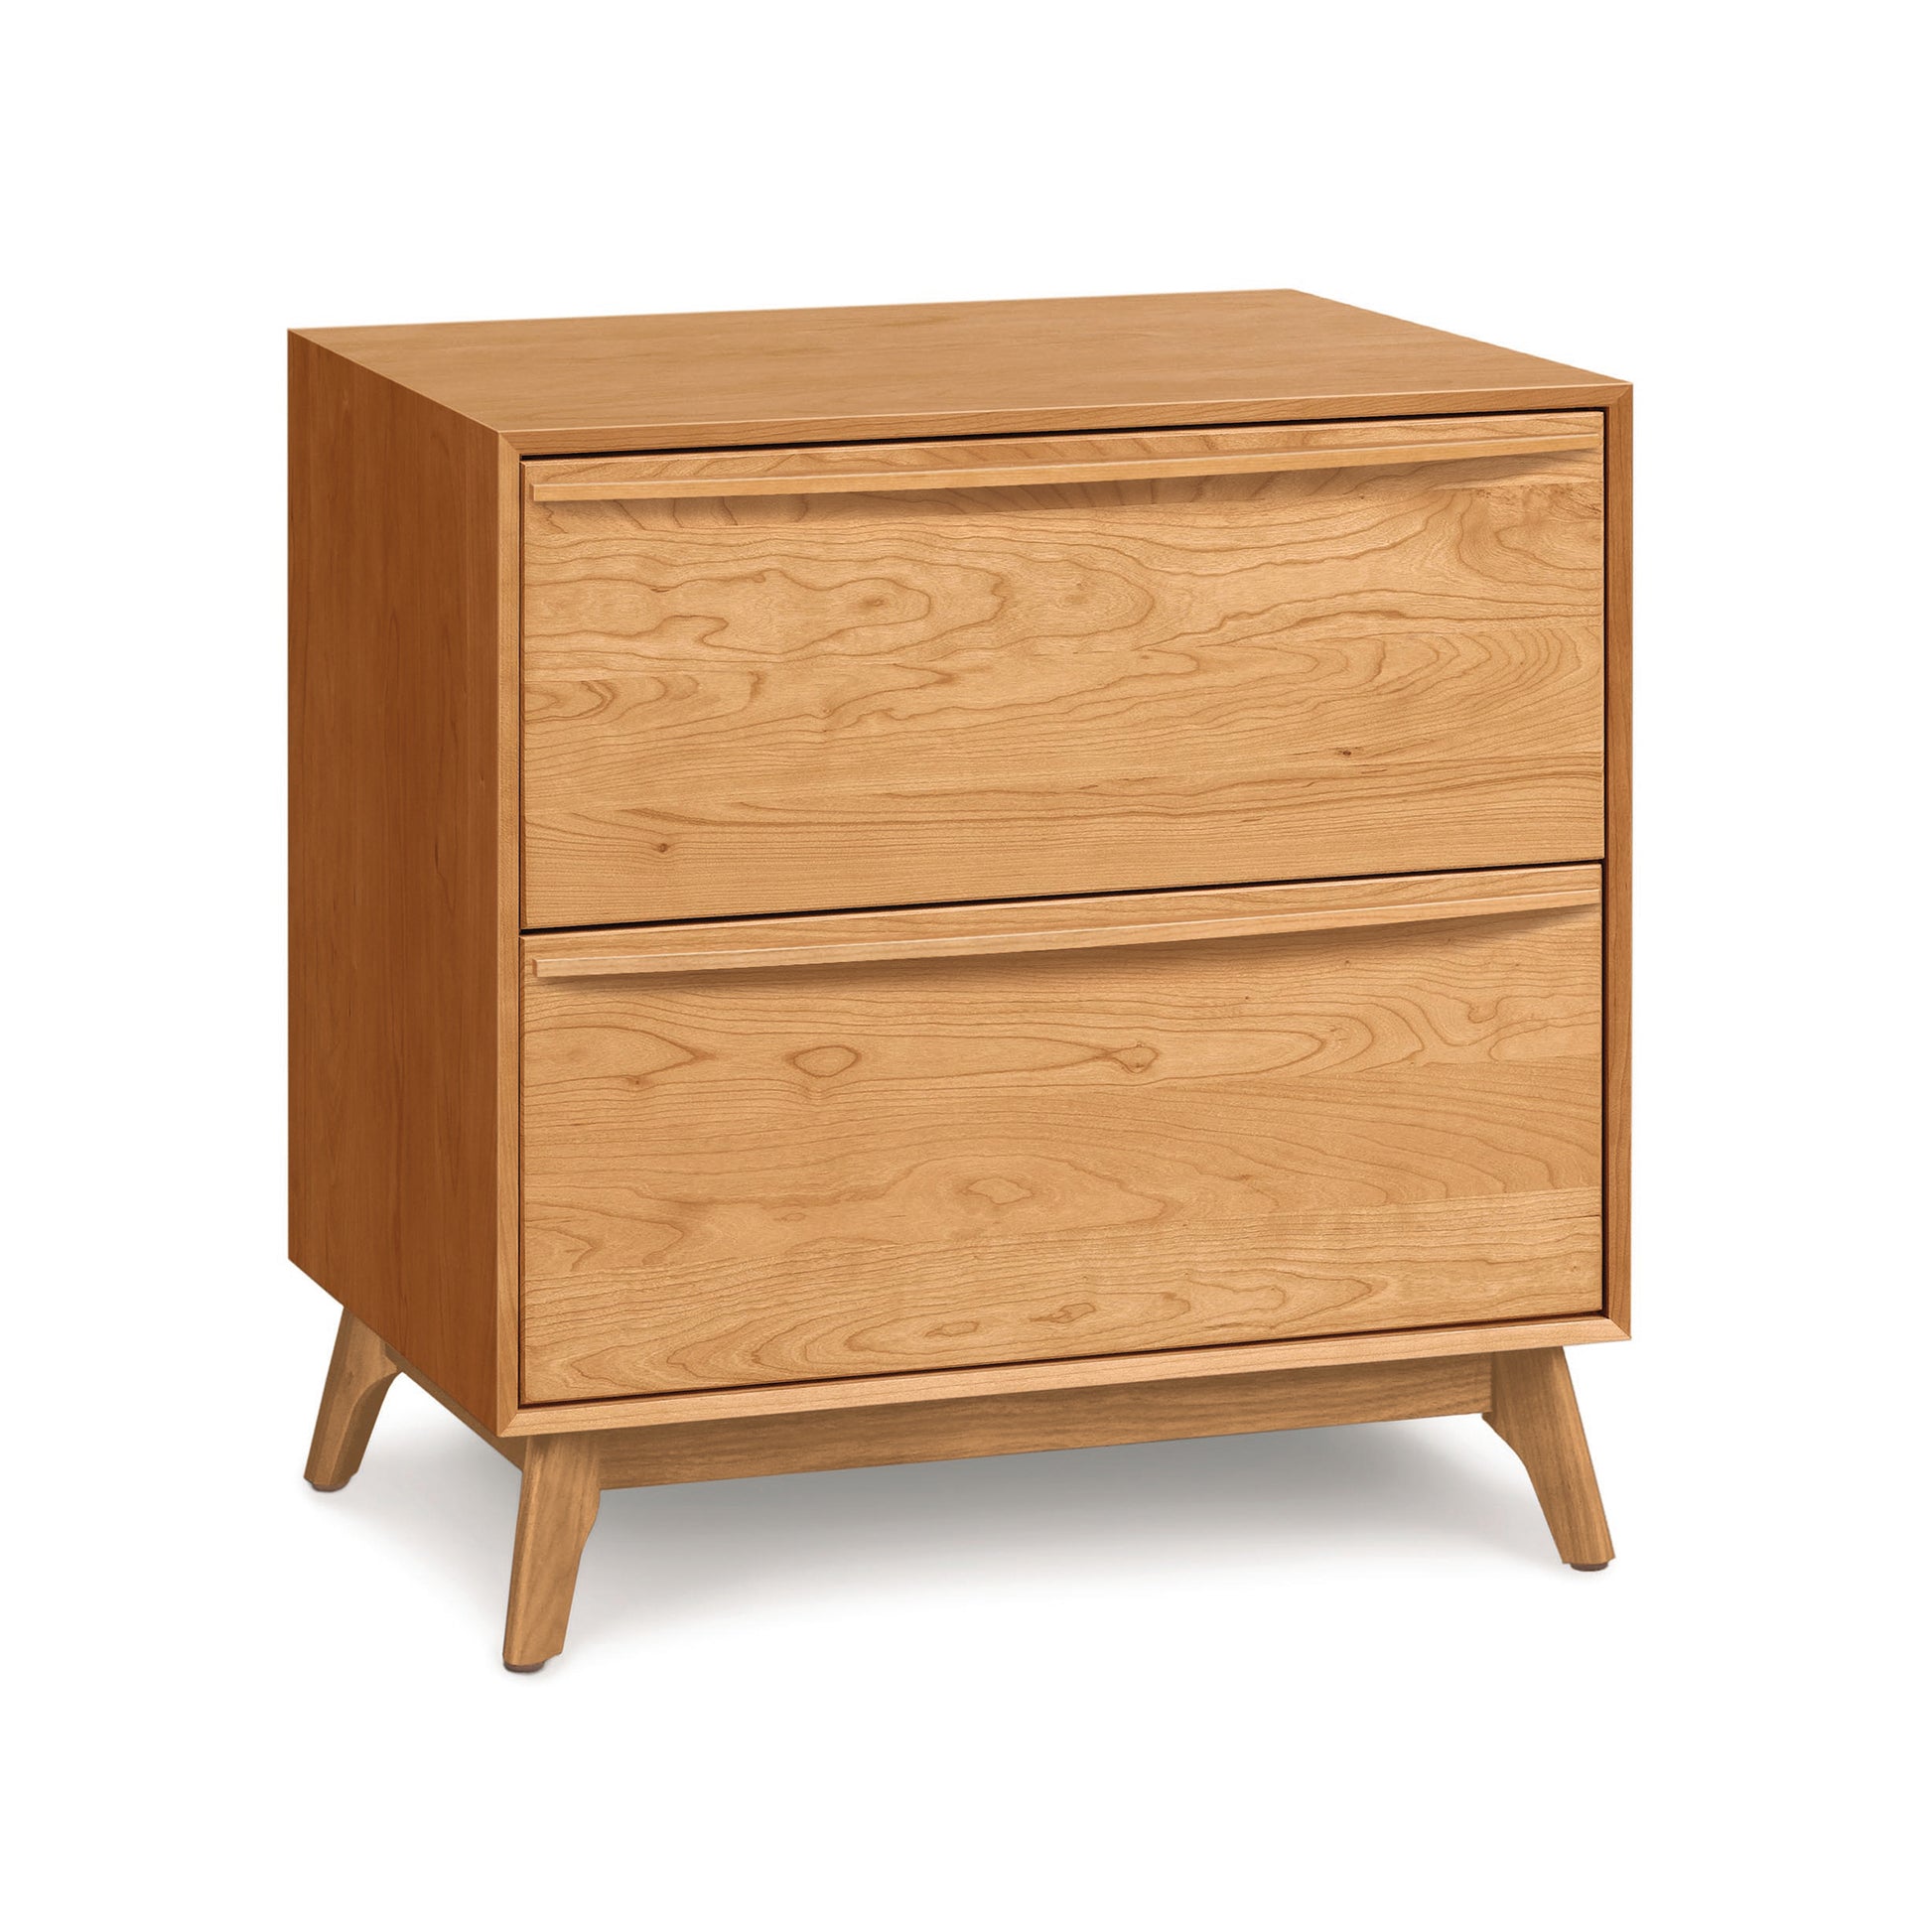 A solid natural hardwoods Copeland Furniture Catalina 2-Drawer Nightstand with angled legs on a white background.